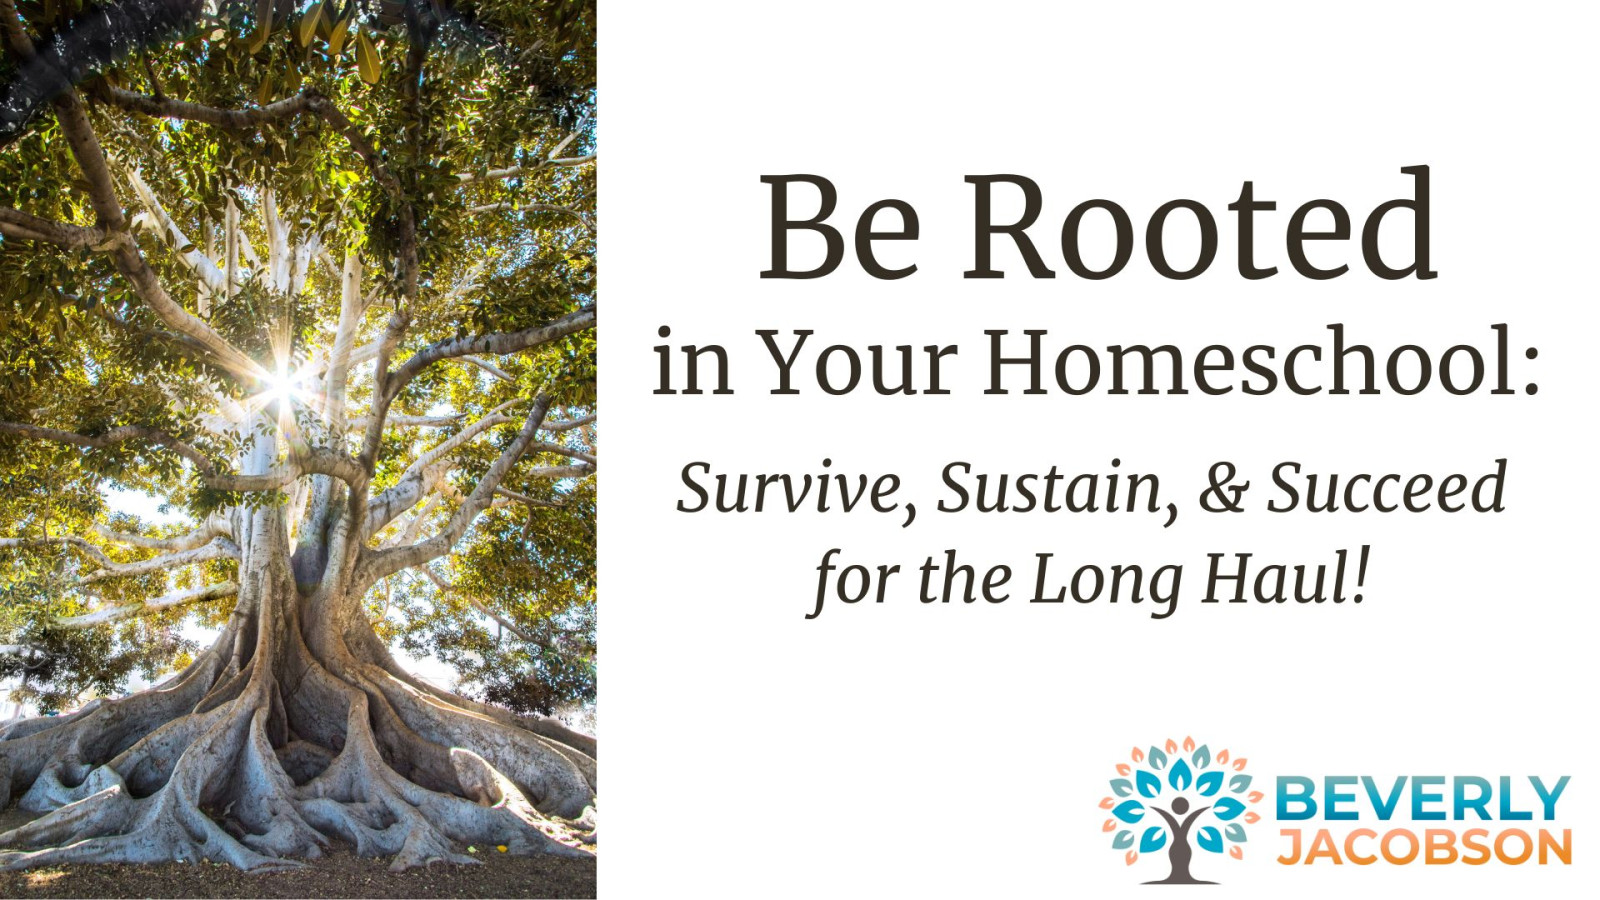 NEW! The BE ROOTED Program